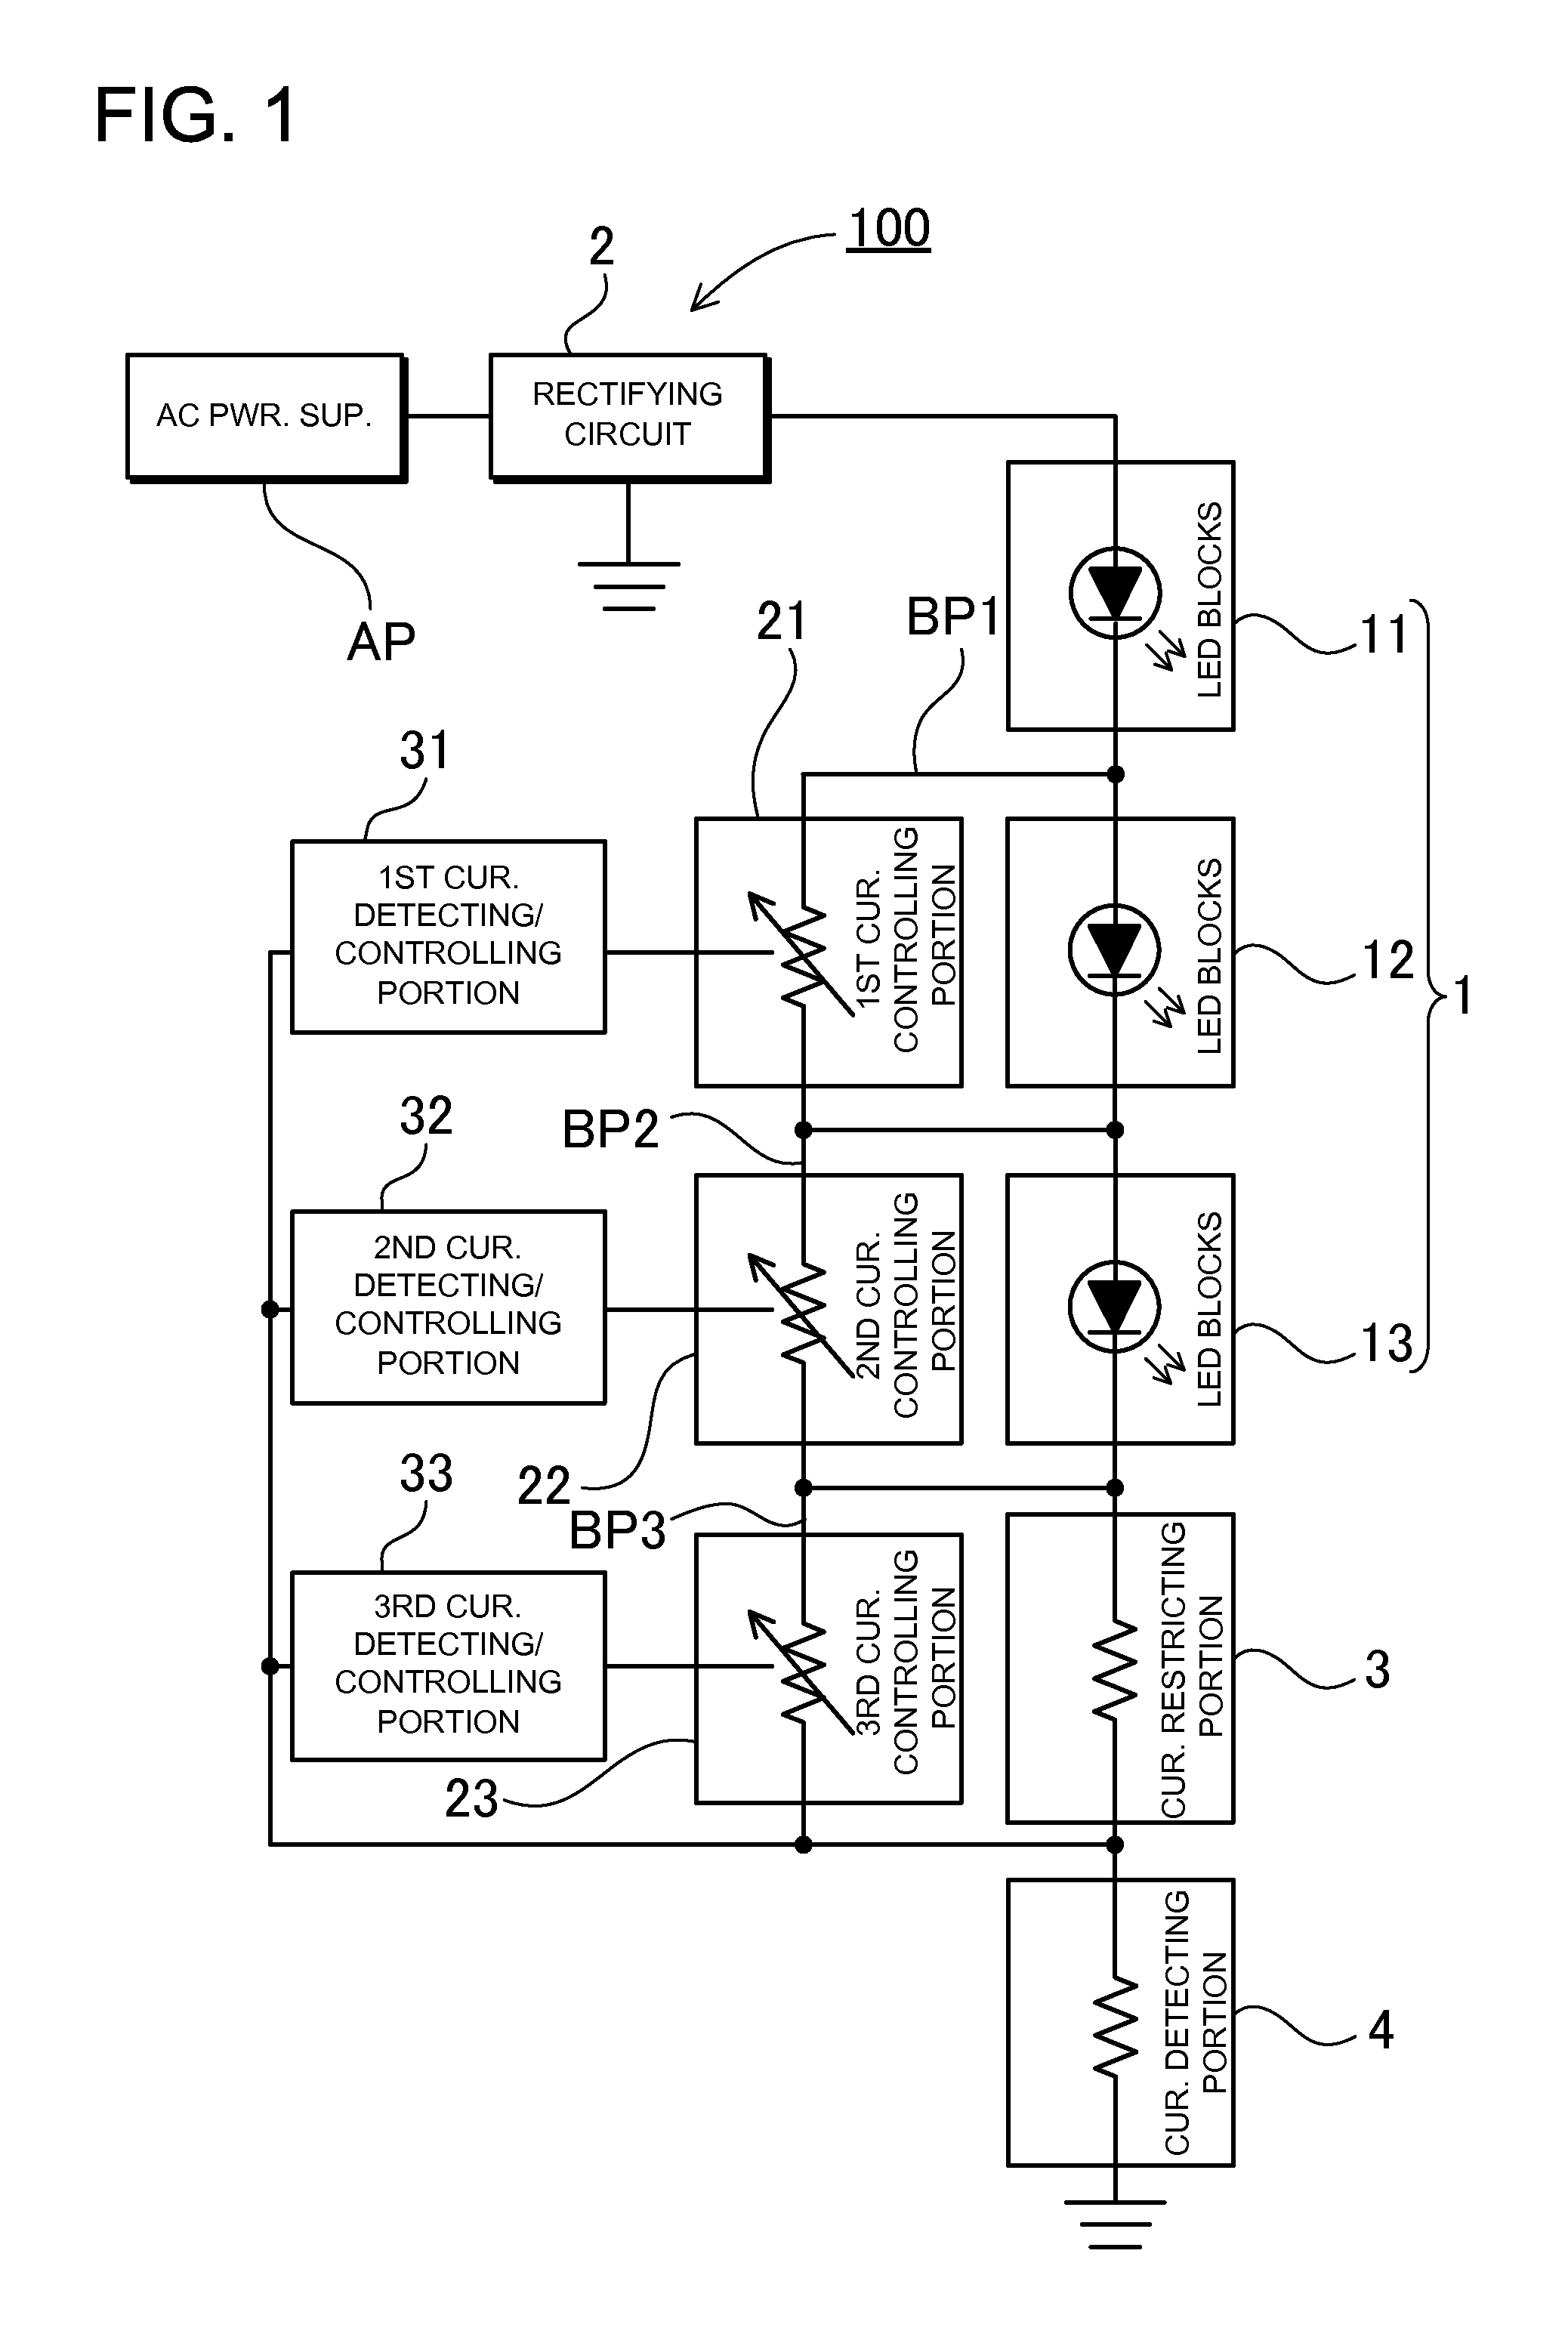 Light-emitting diode driving apparatus and light-emitting diode lighting controlling method